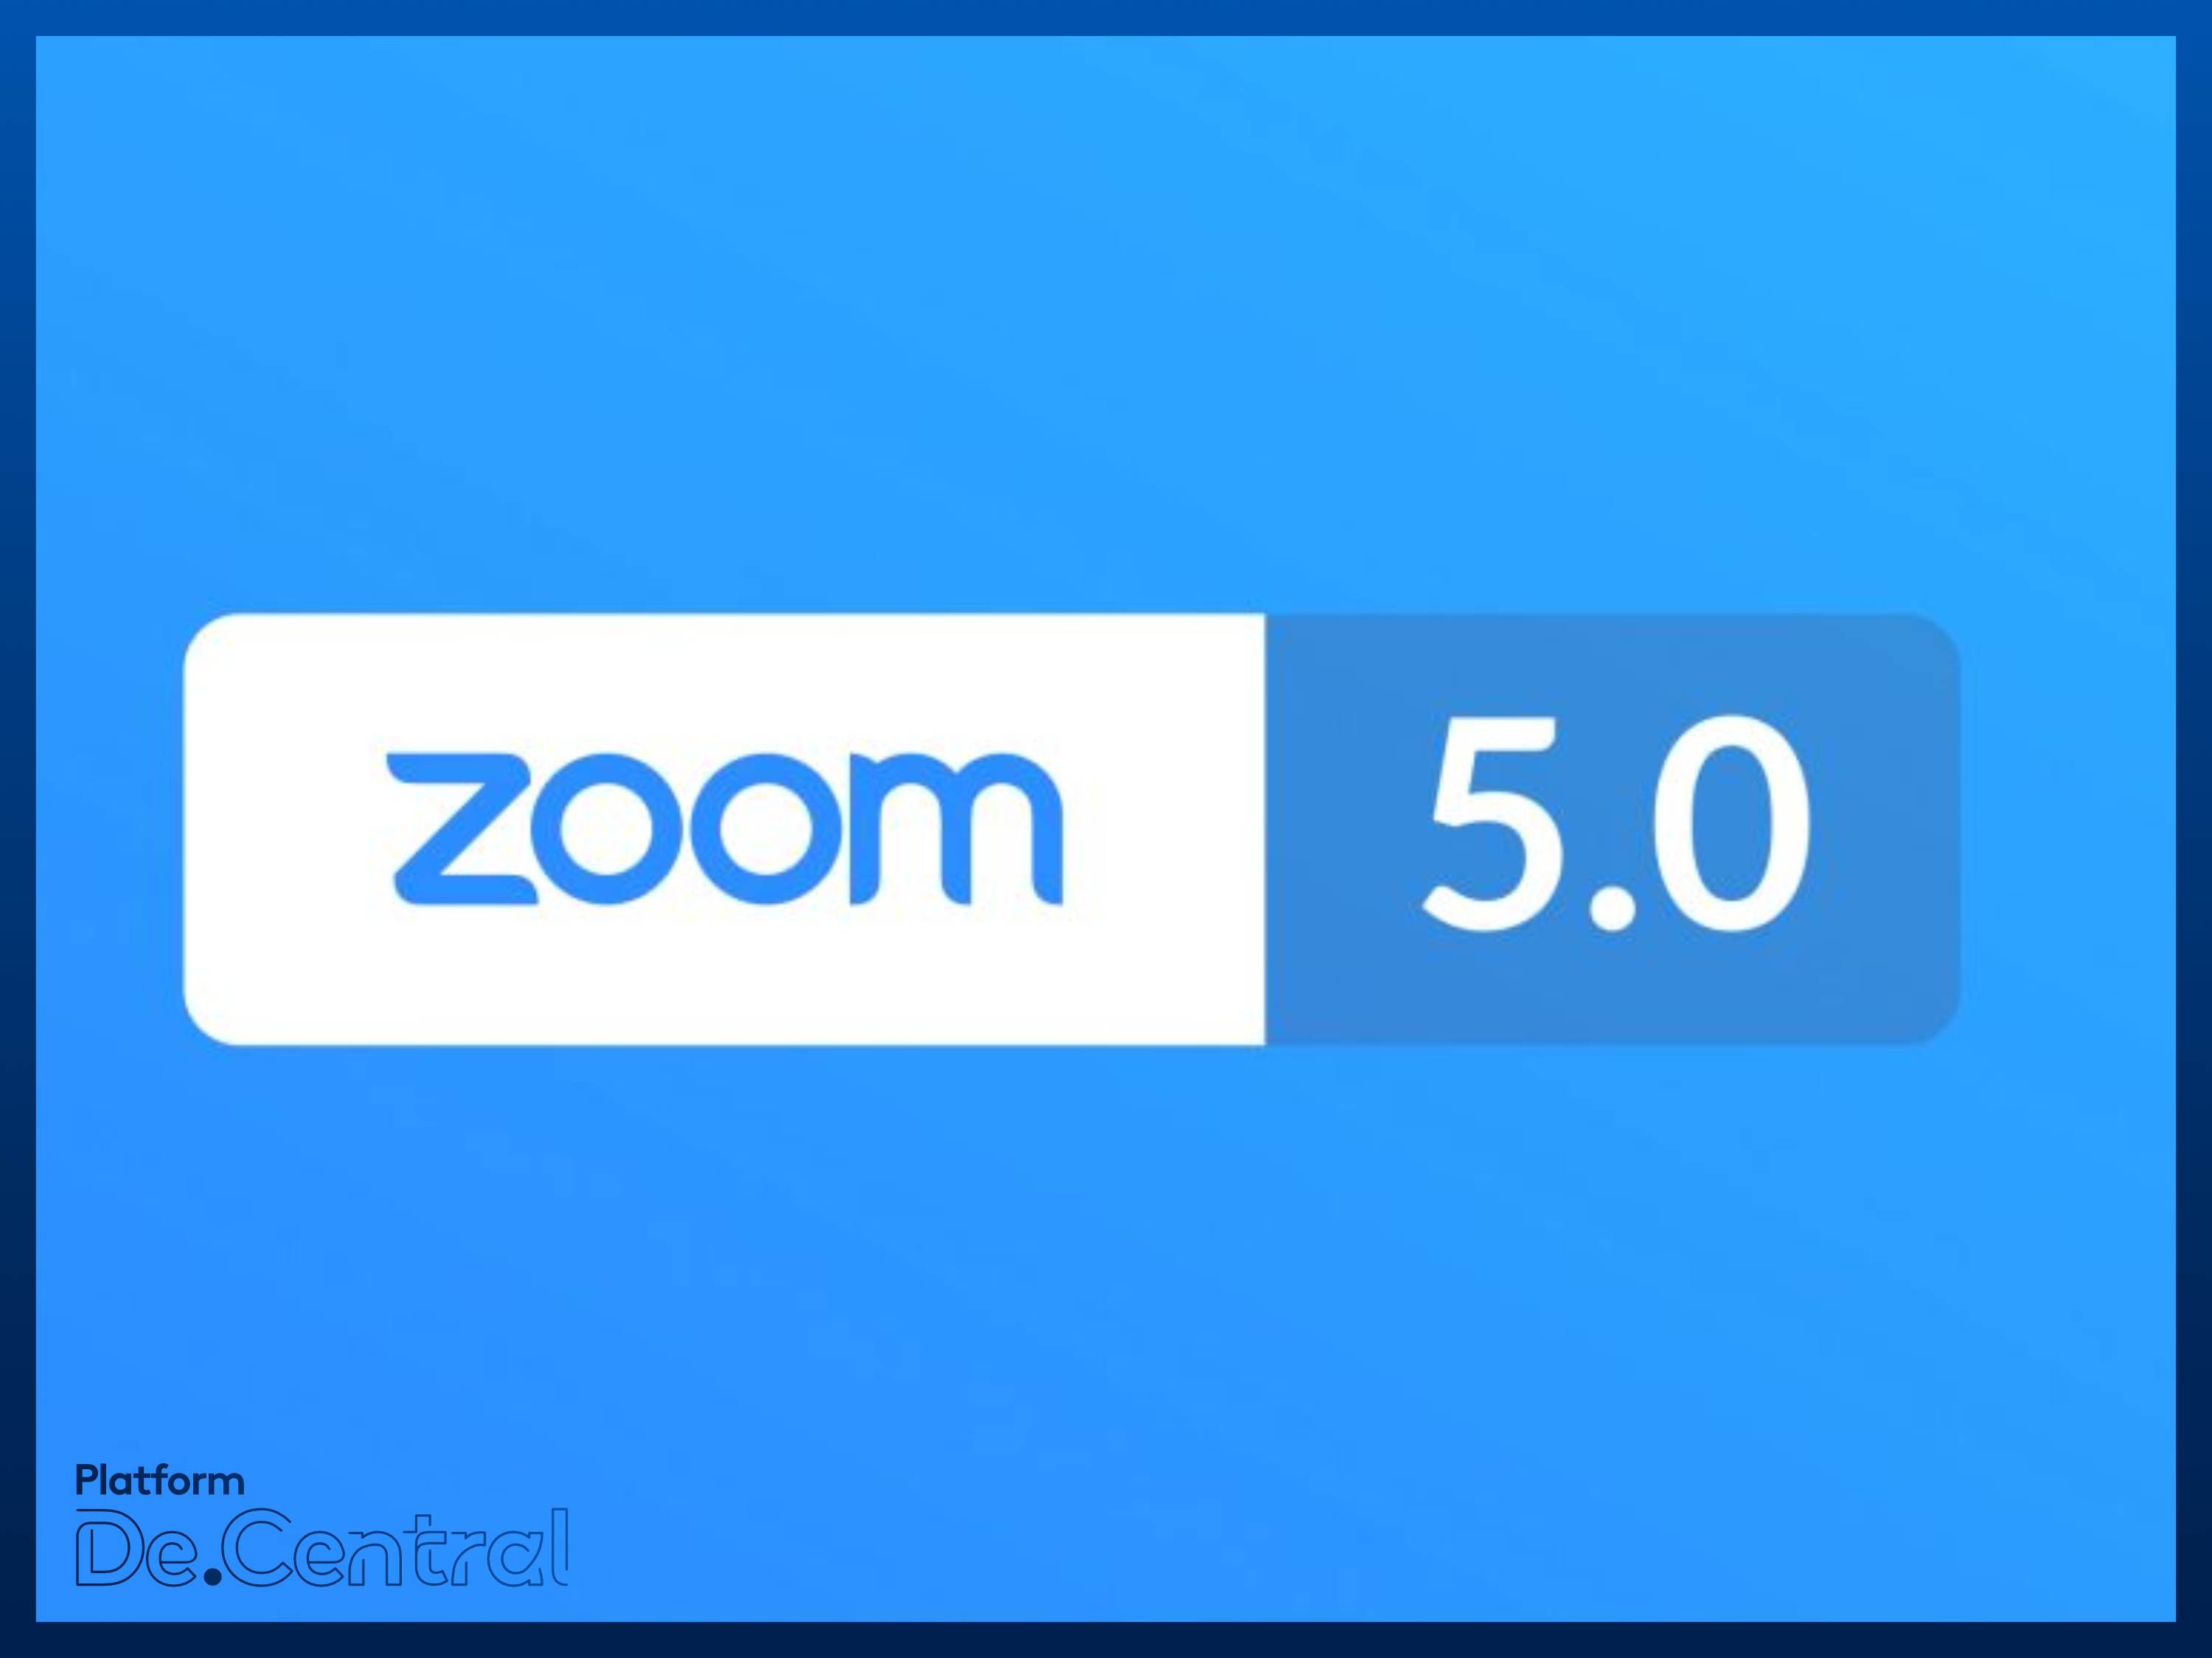 Zoom 5.0 is rolling out and is addressing some complaints